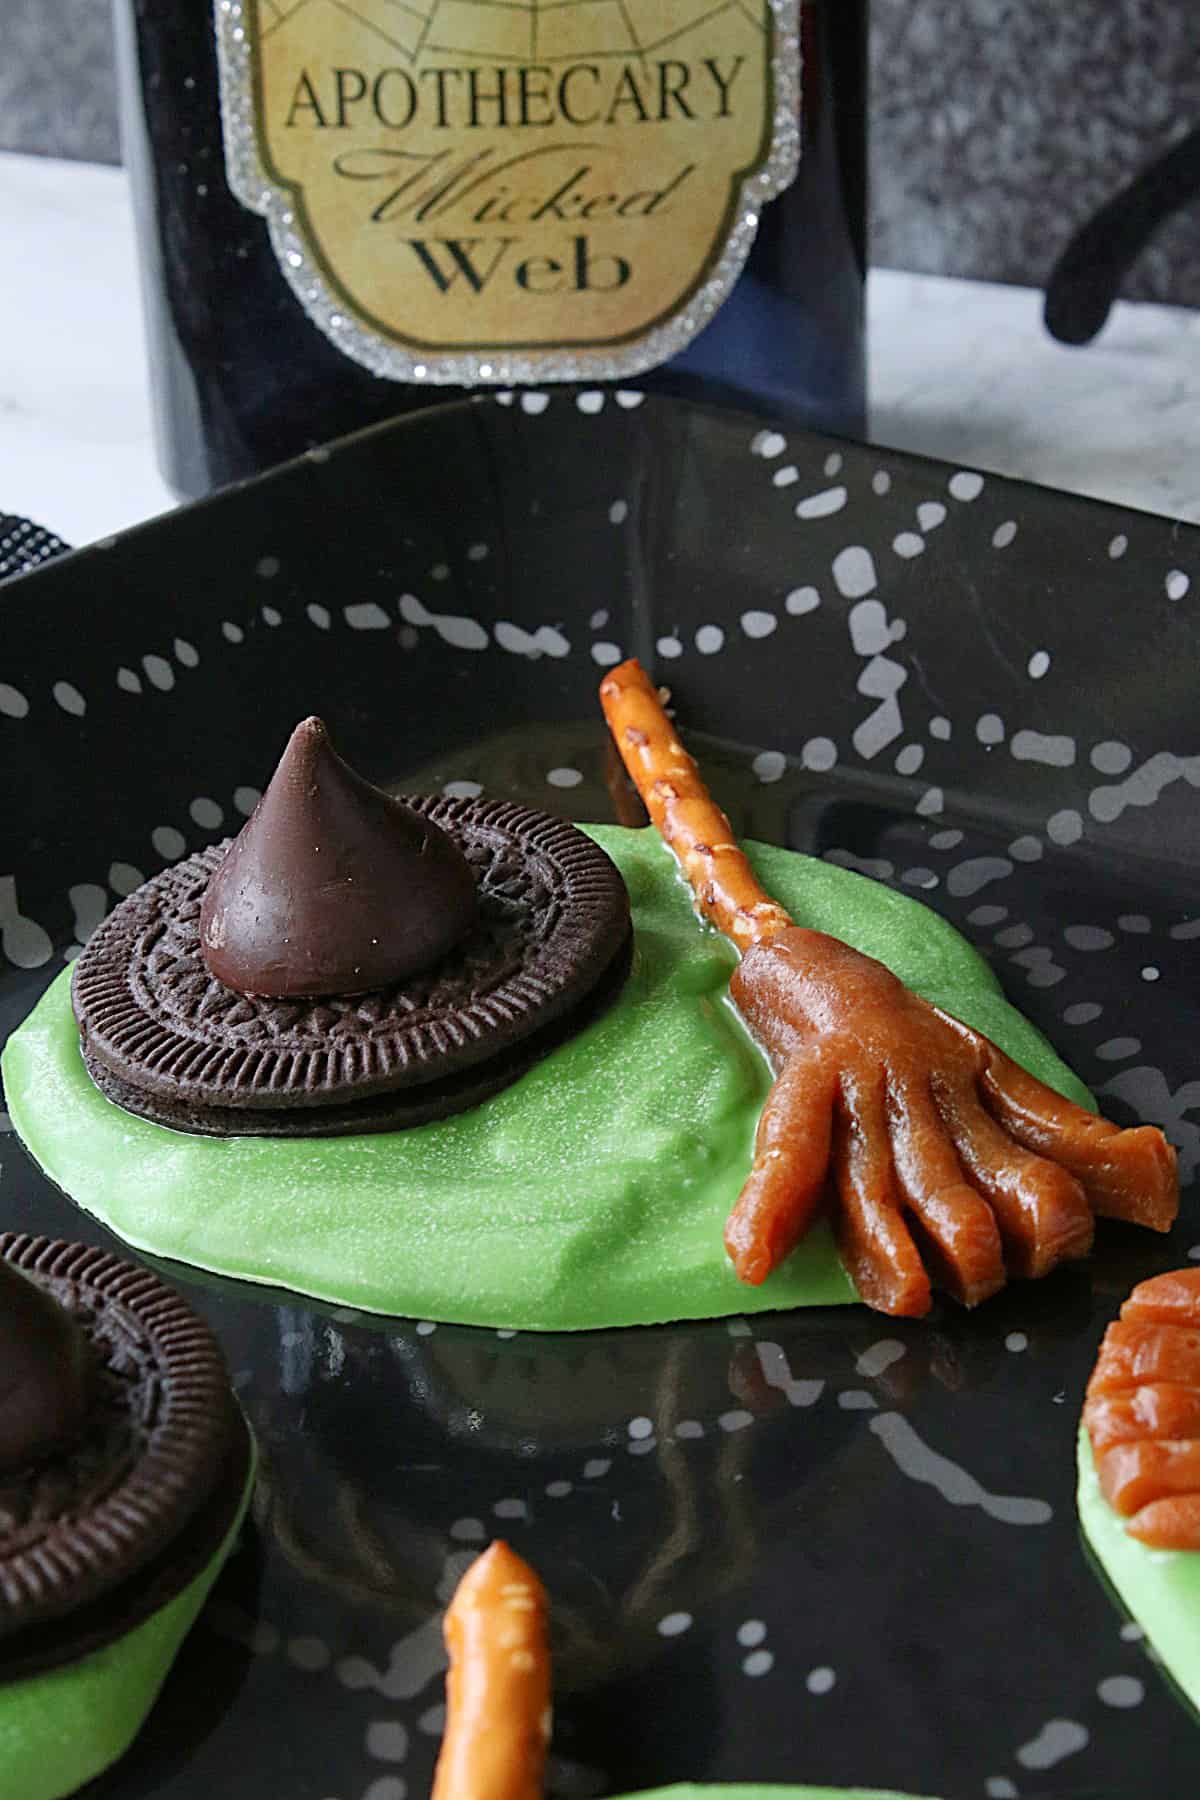 A green Melted Witch Candy with a pretzel and caramel broom stick.